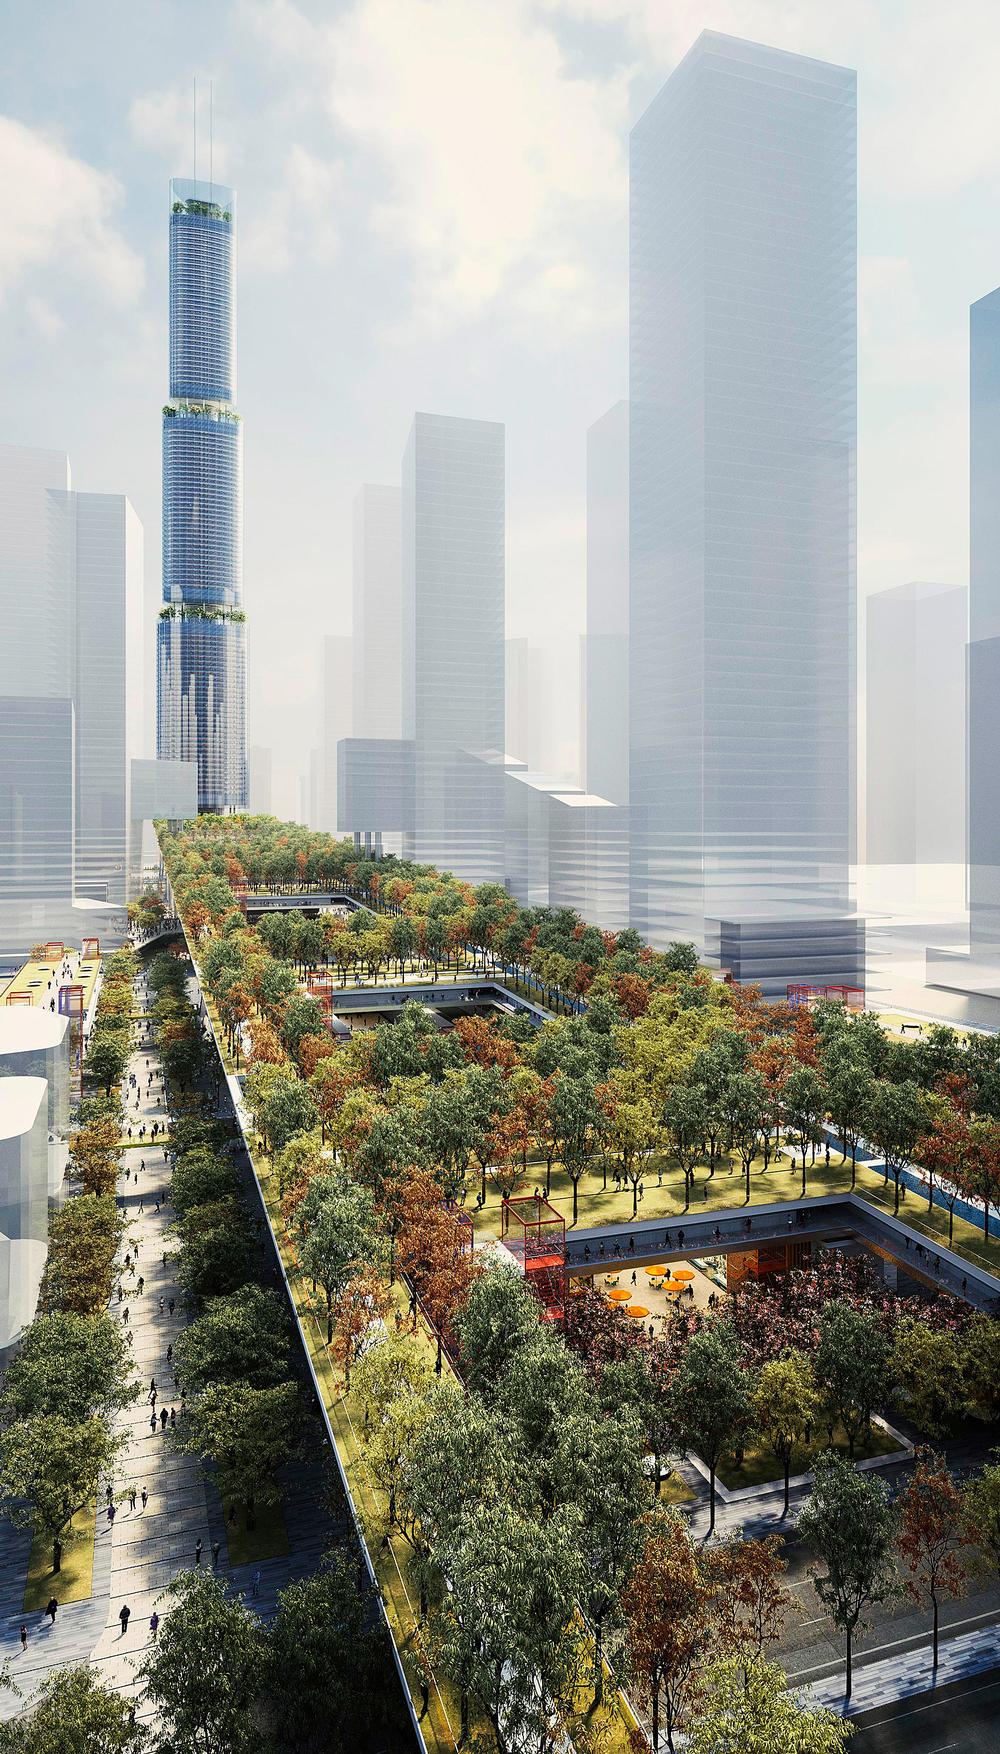 The Shenzhen Sky Garden will be built on existing reclaimed land